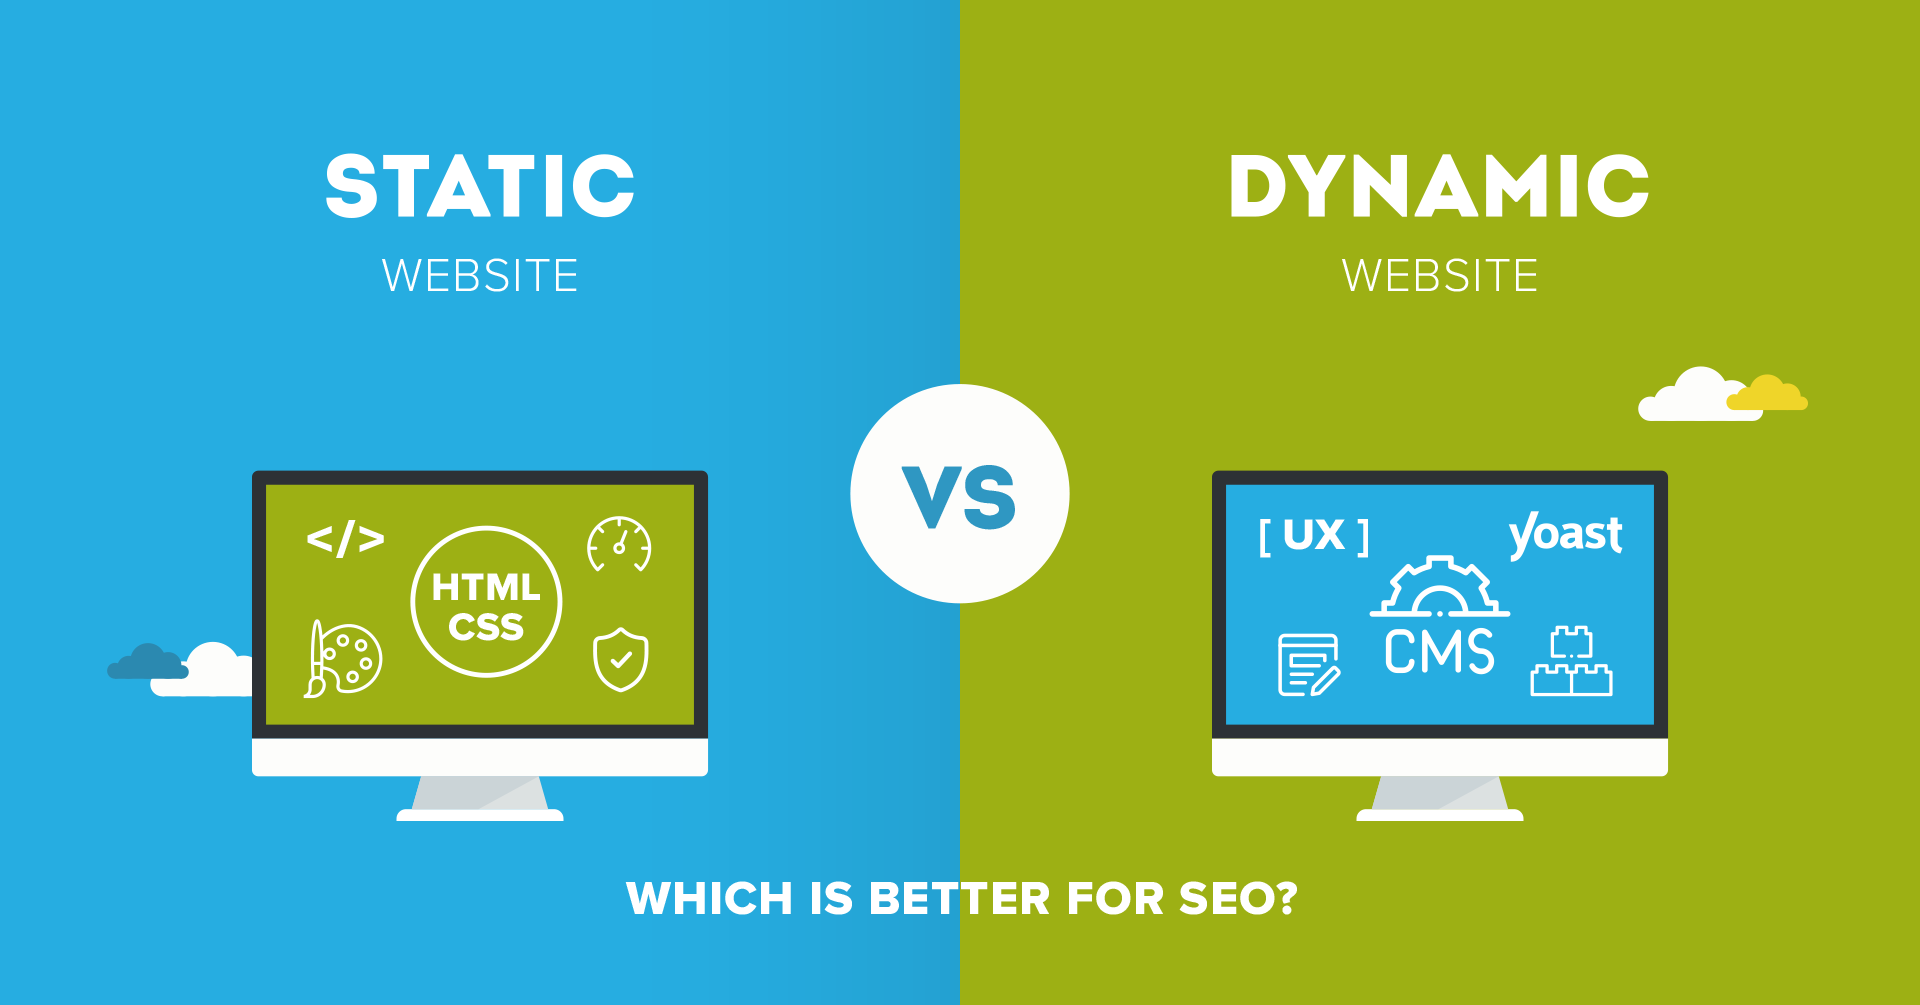 Can a website be both static and dynamic?